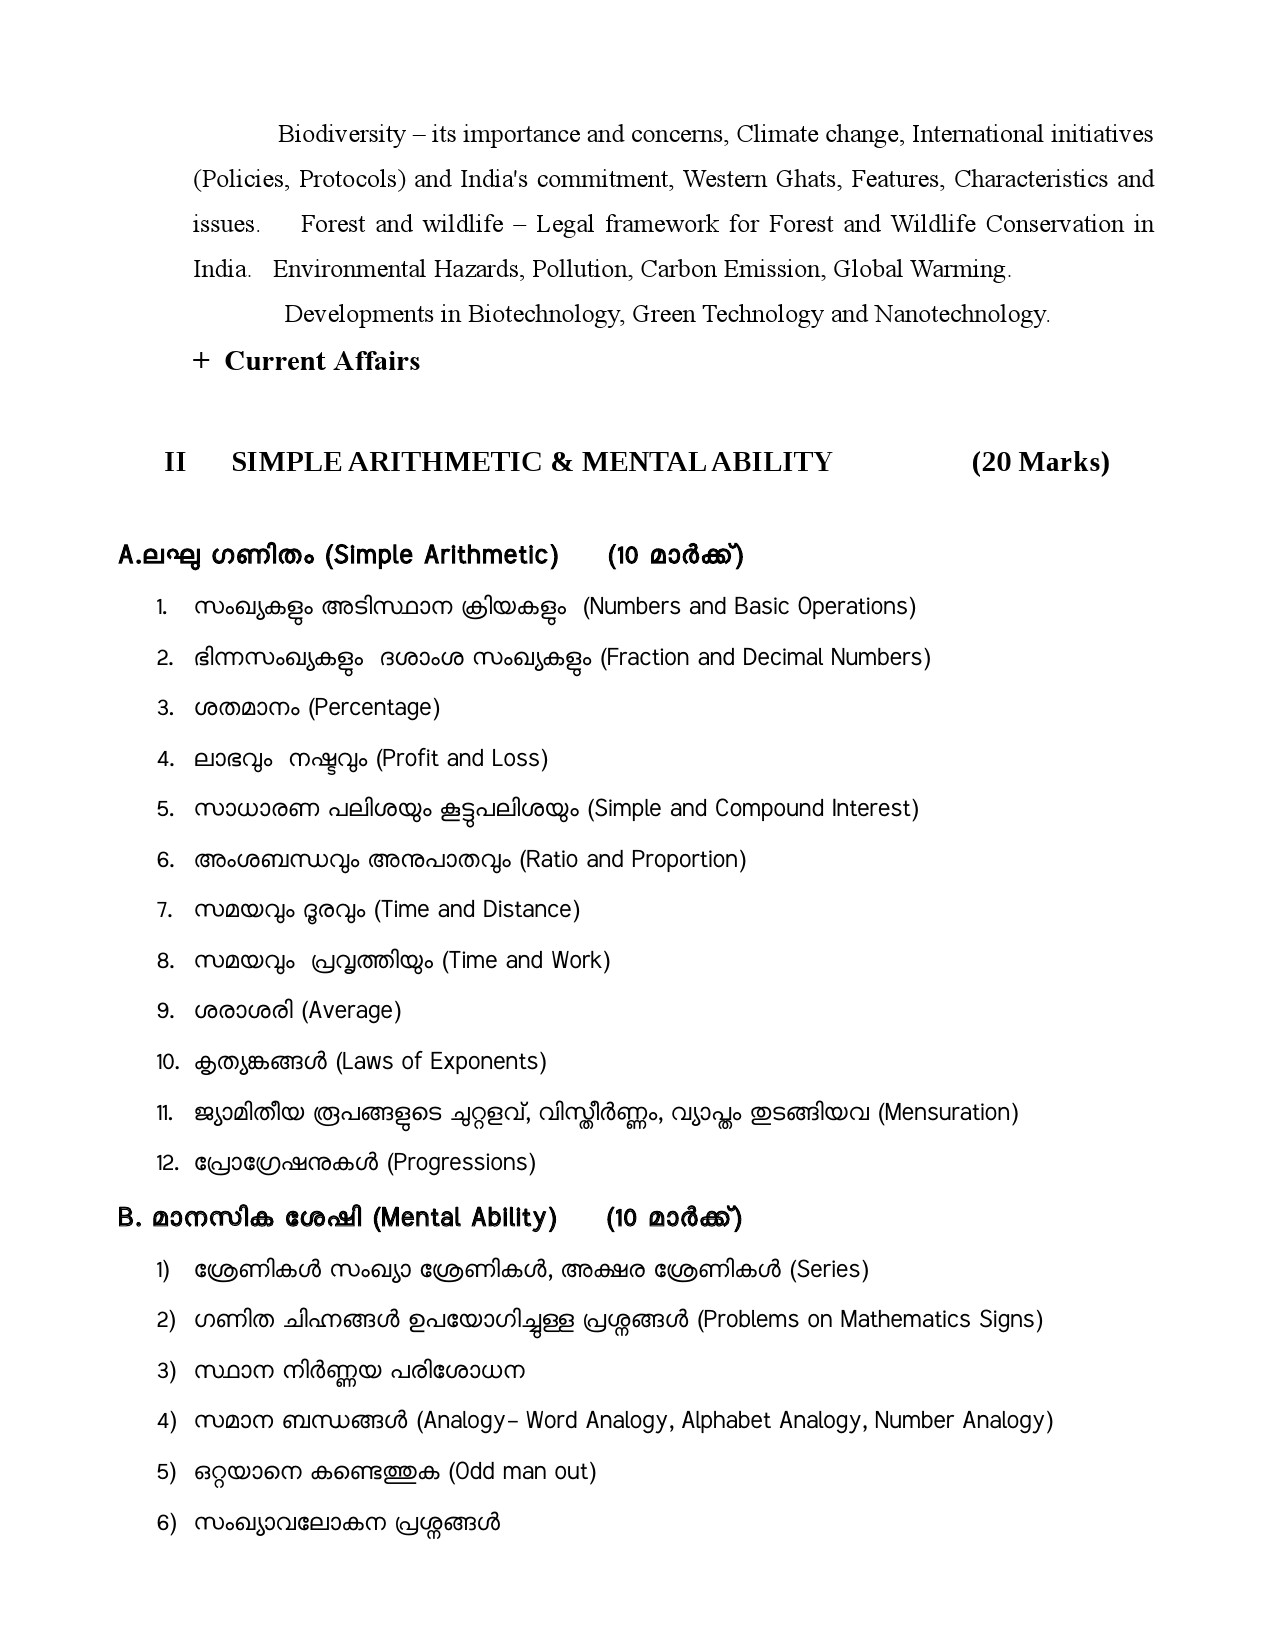 Detailed Syllabus for Common Preliminary Examination for Field Officer - Notification Image 8